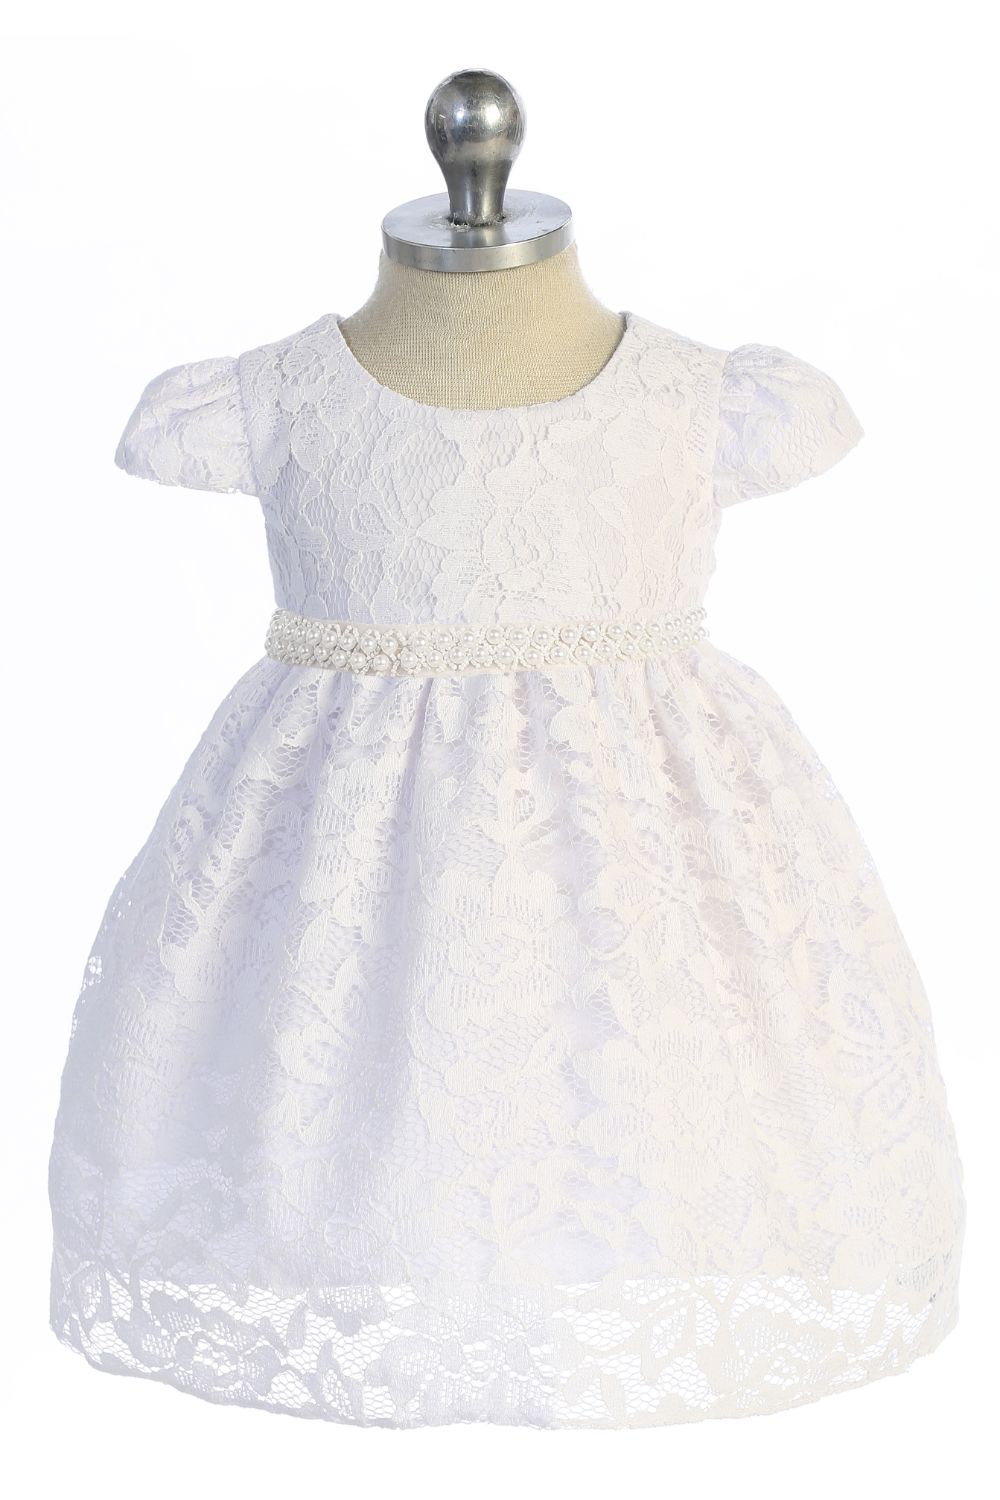 532-C- Lace V Back Bow Baby Dress w/ Thick Pearl Trim